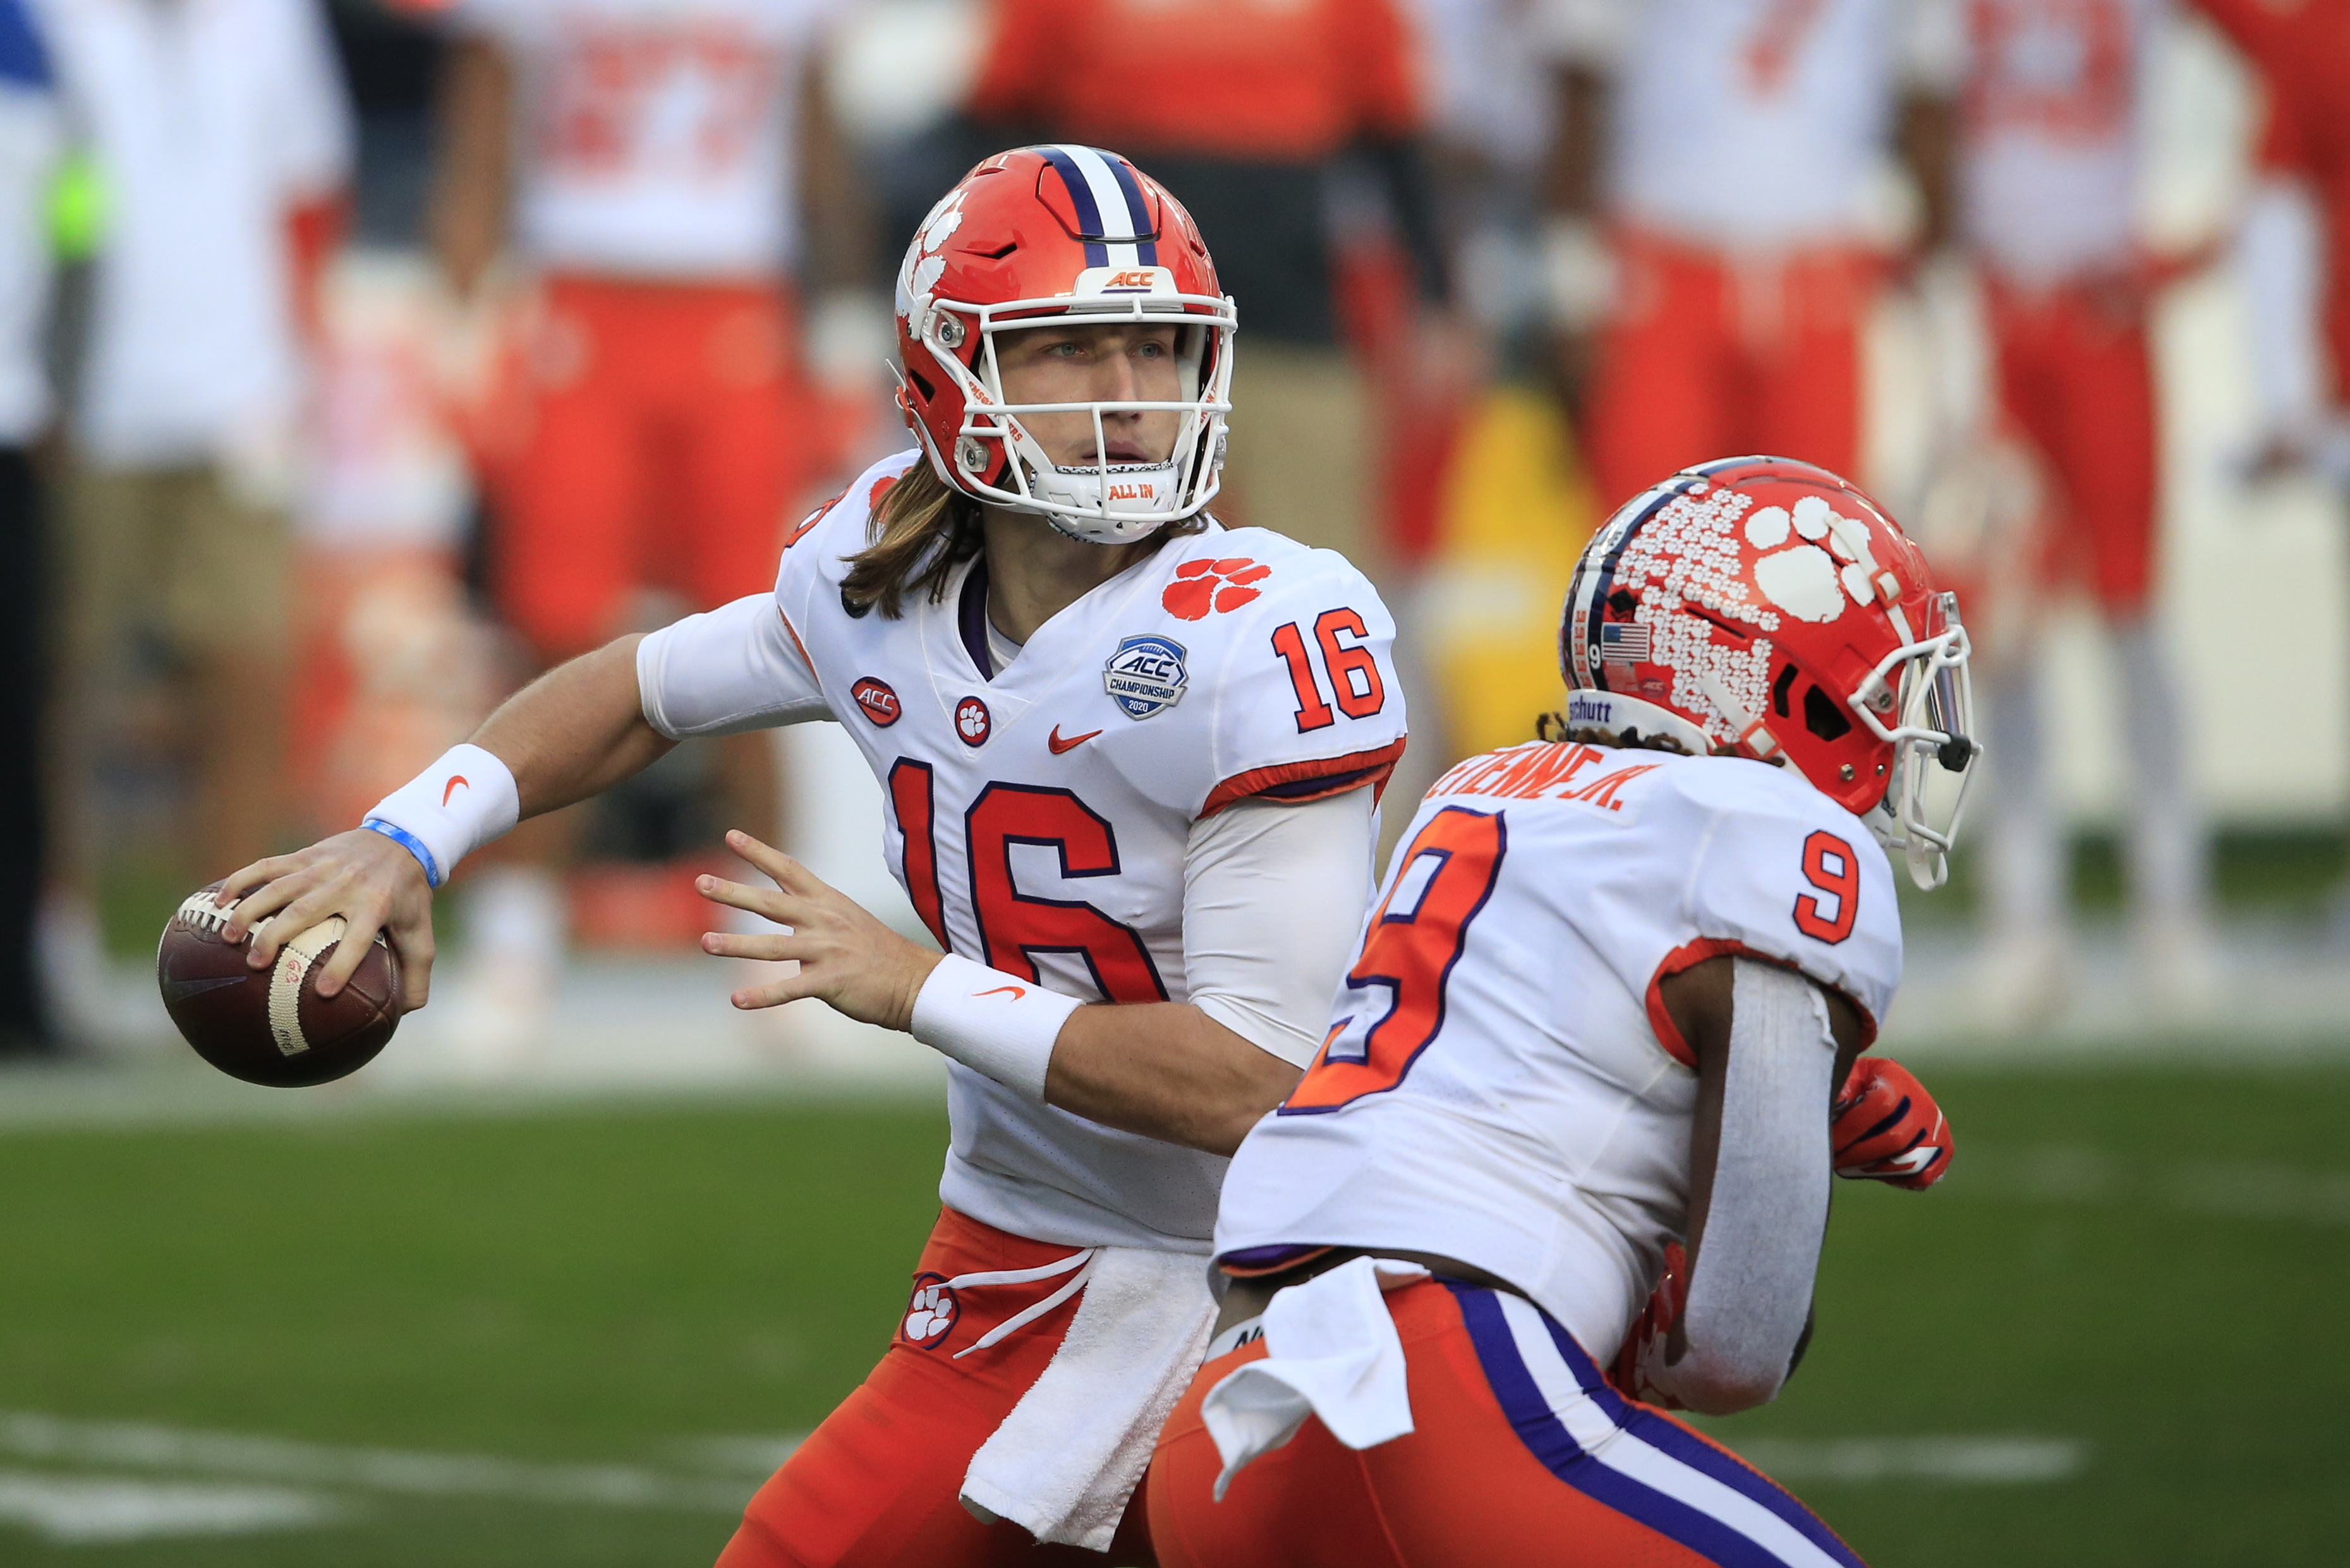 In the ACC, picking the top quarterback won't be easy task